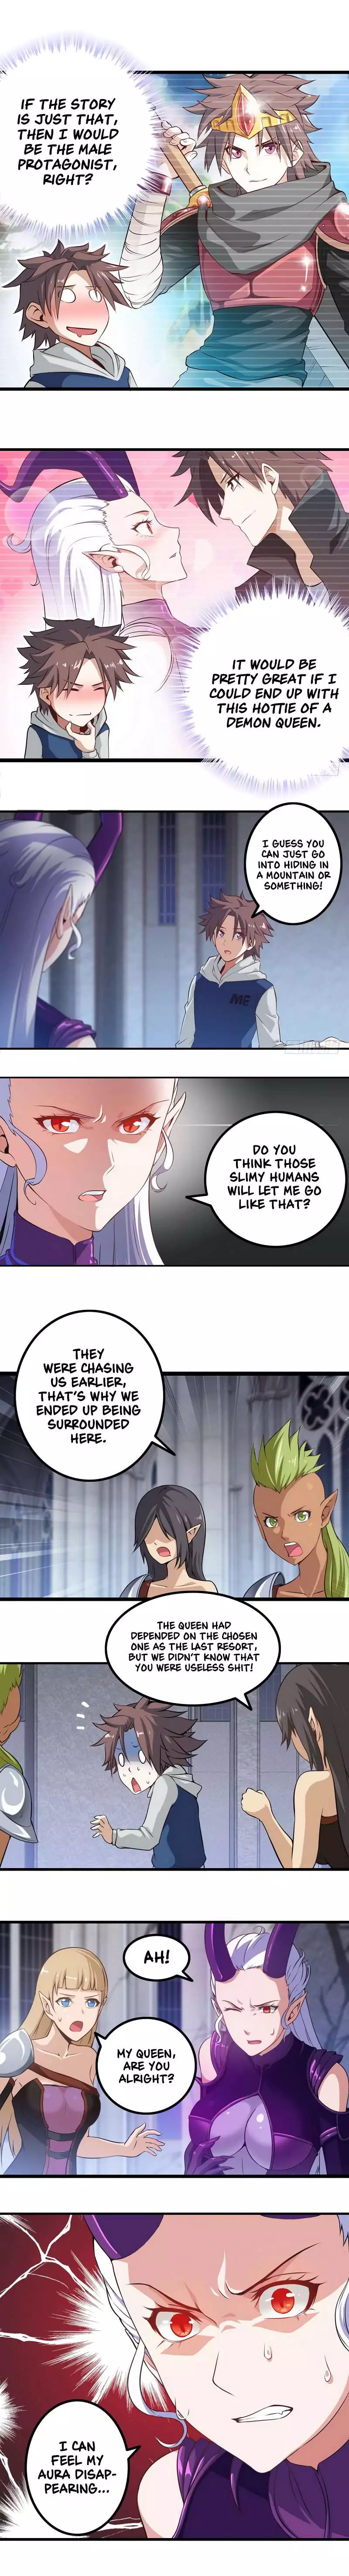 My Wife is a Demon Queen - 2 page 04